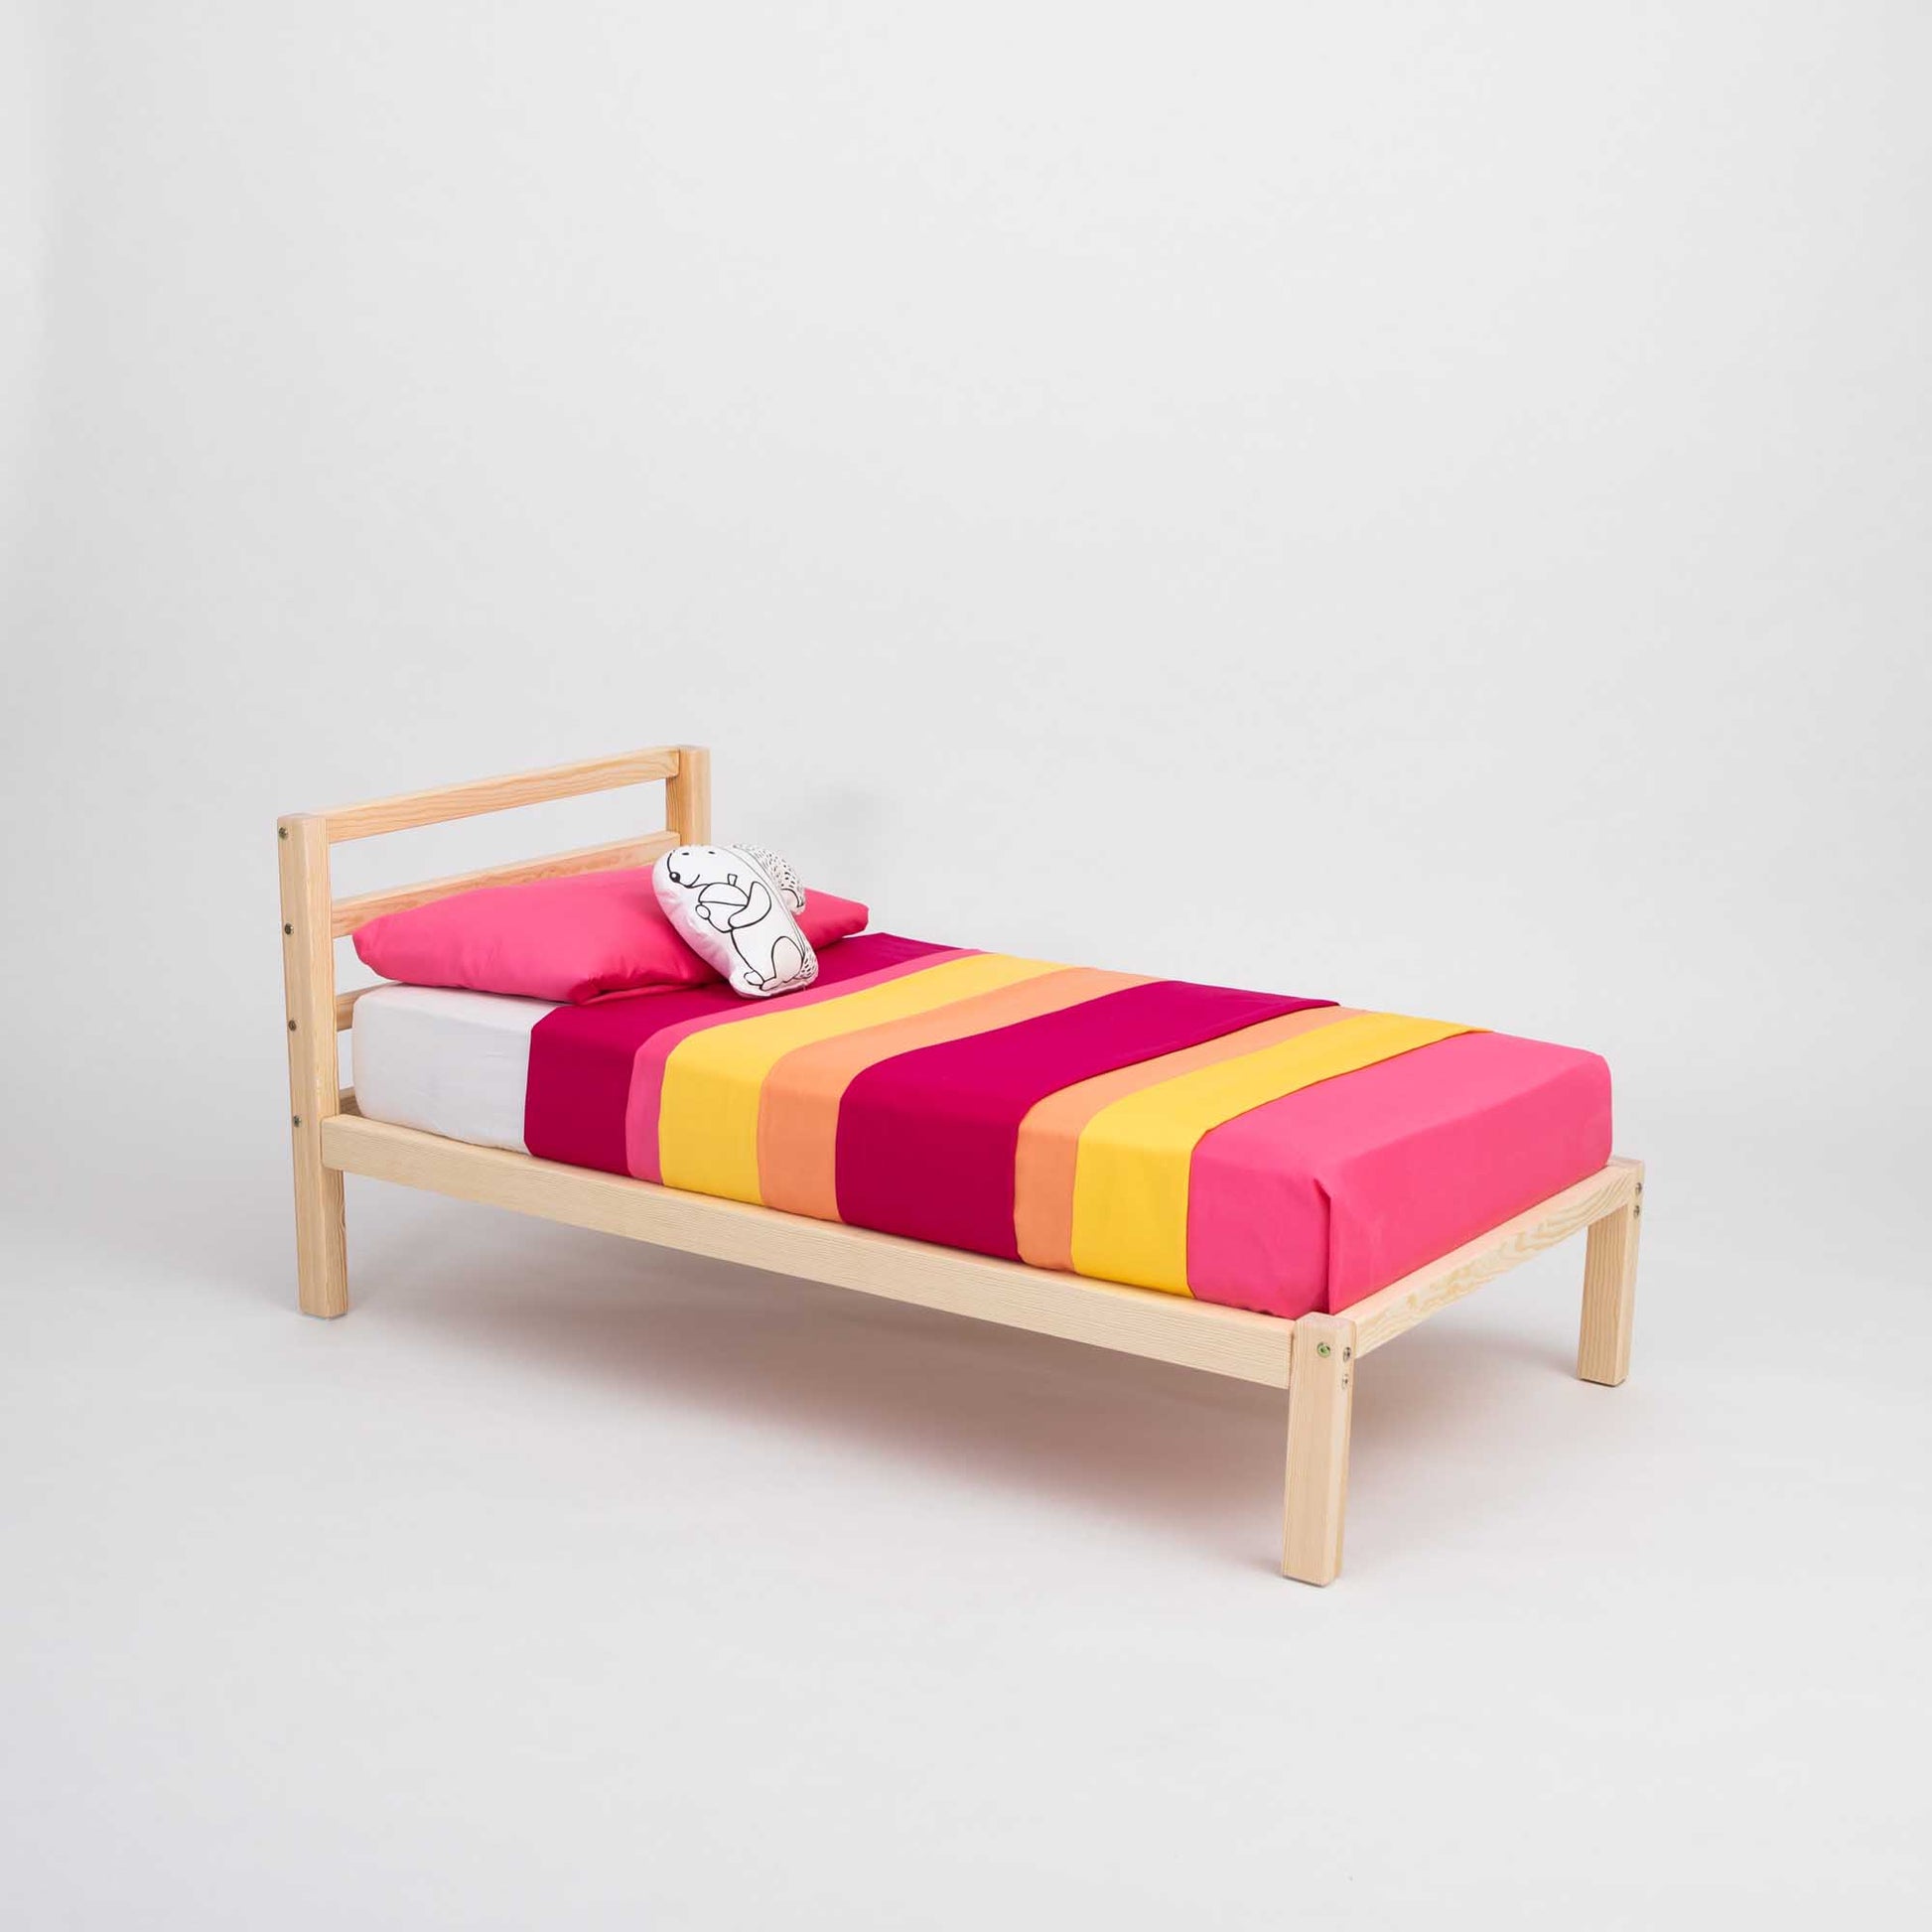 A Kids' bed on legs with a horizontal rail headboard from Sweet Home From Wood, with a pink and yellow striped blanket.